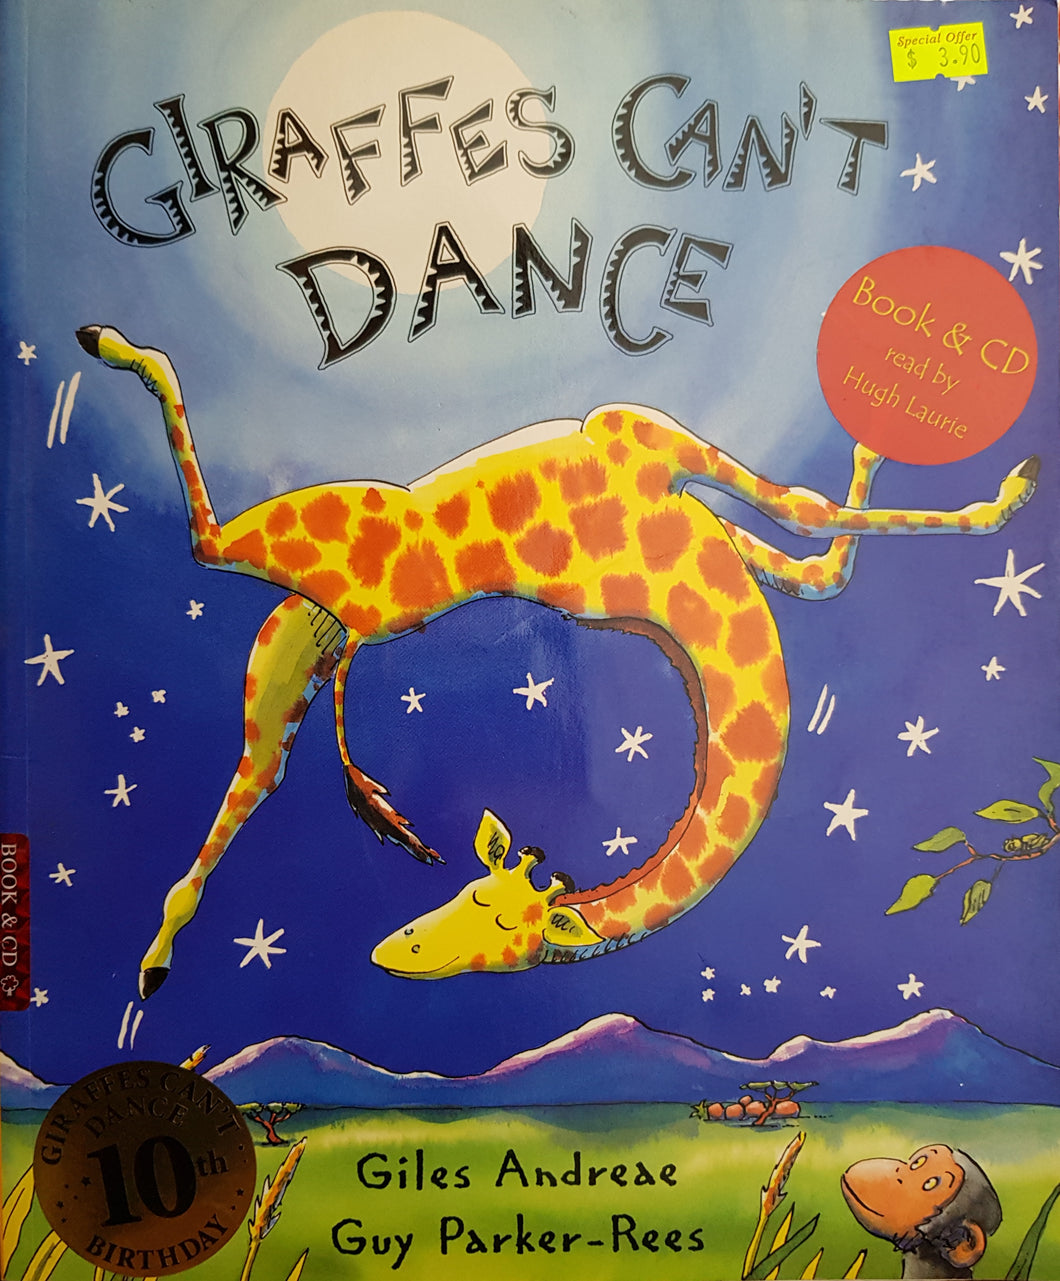 Giraffes Can't Dance - Giles Andreae & Guy Parker-Rees